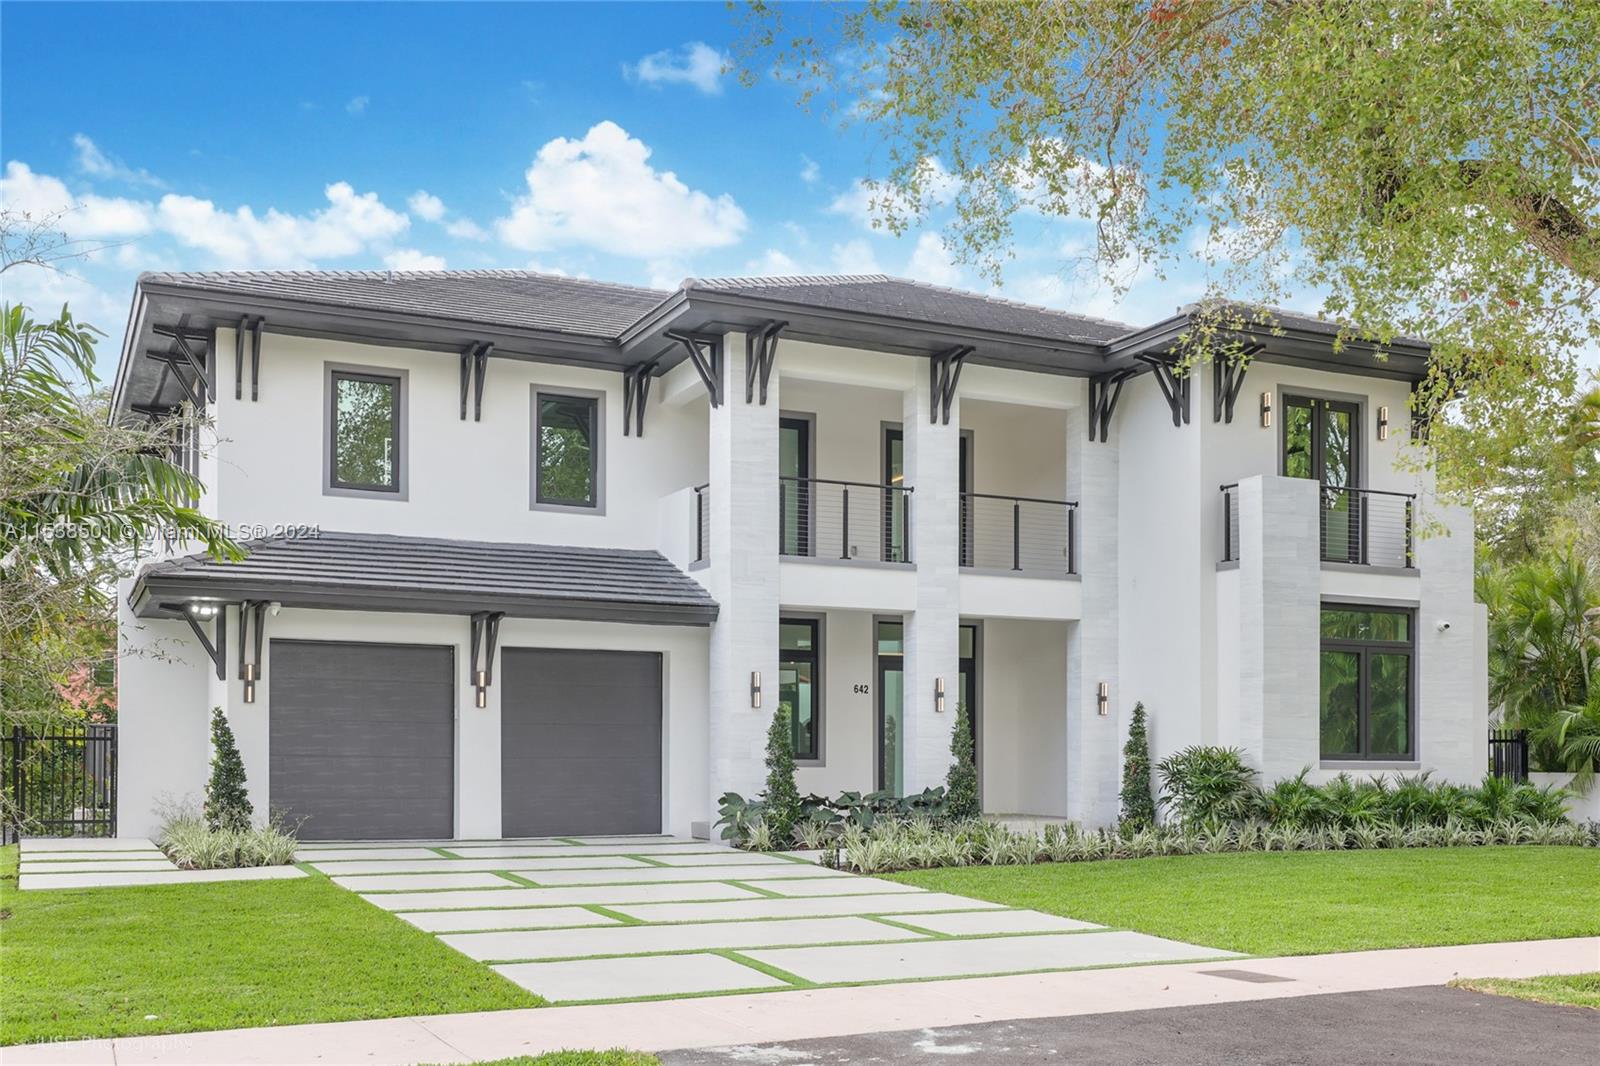 Ready for move in! Brand new transitional-style executive home within walking distance from Granada Golf Course, Miracle Mile and Downtown Coral Gables. House is on a double lot and features 5 bedrooms, including one on the ground floor, 6 bathrooms, 2 car garage, ample yard and pool. Oversized primary w/ 2 walk-in and large spa bath. Top of the line European kitchen cabinets and appliances including Wolf oven, speed oven, and electric range. A laundry on each floor. Large format porcelain and wood floors. Prewired for entertainment and security system, floating staircase with architectural glass railing. Top of the line impact windows and doors with Solarban 70 High Performing Low E Glass. Connected to the sewer system and Municipal water. See attached floorplans/specs.